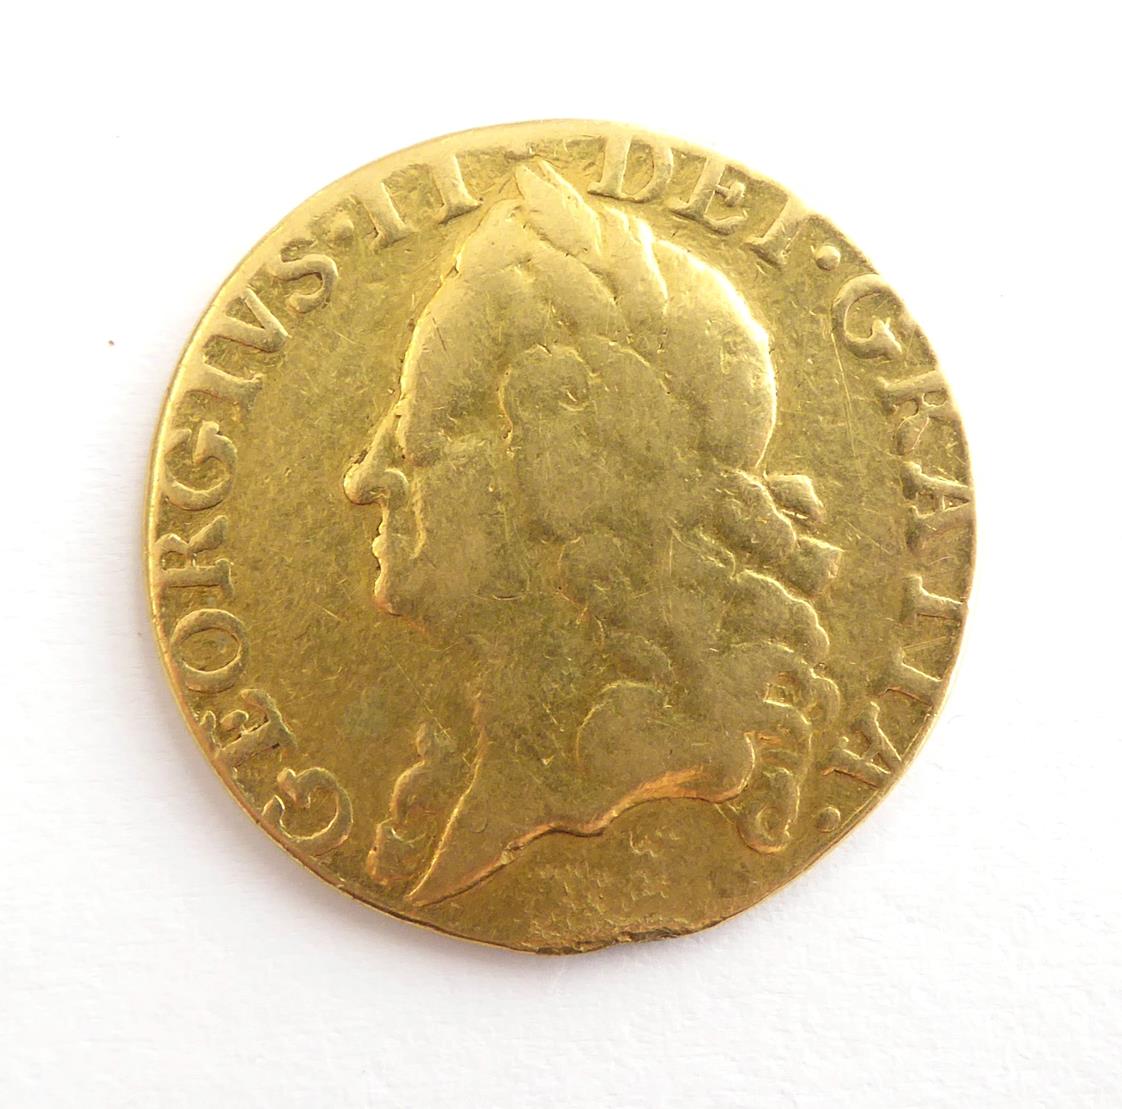 Lot 2054 - George II Guinea 1748 Old Laur. Head S3680 VG probably a contemporary copy ex mount 12 o'clock